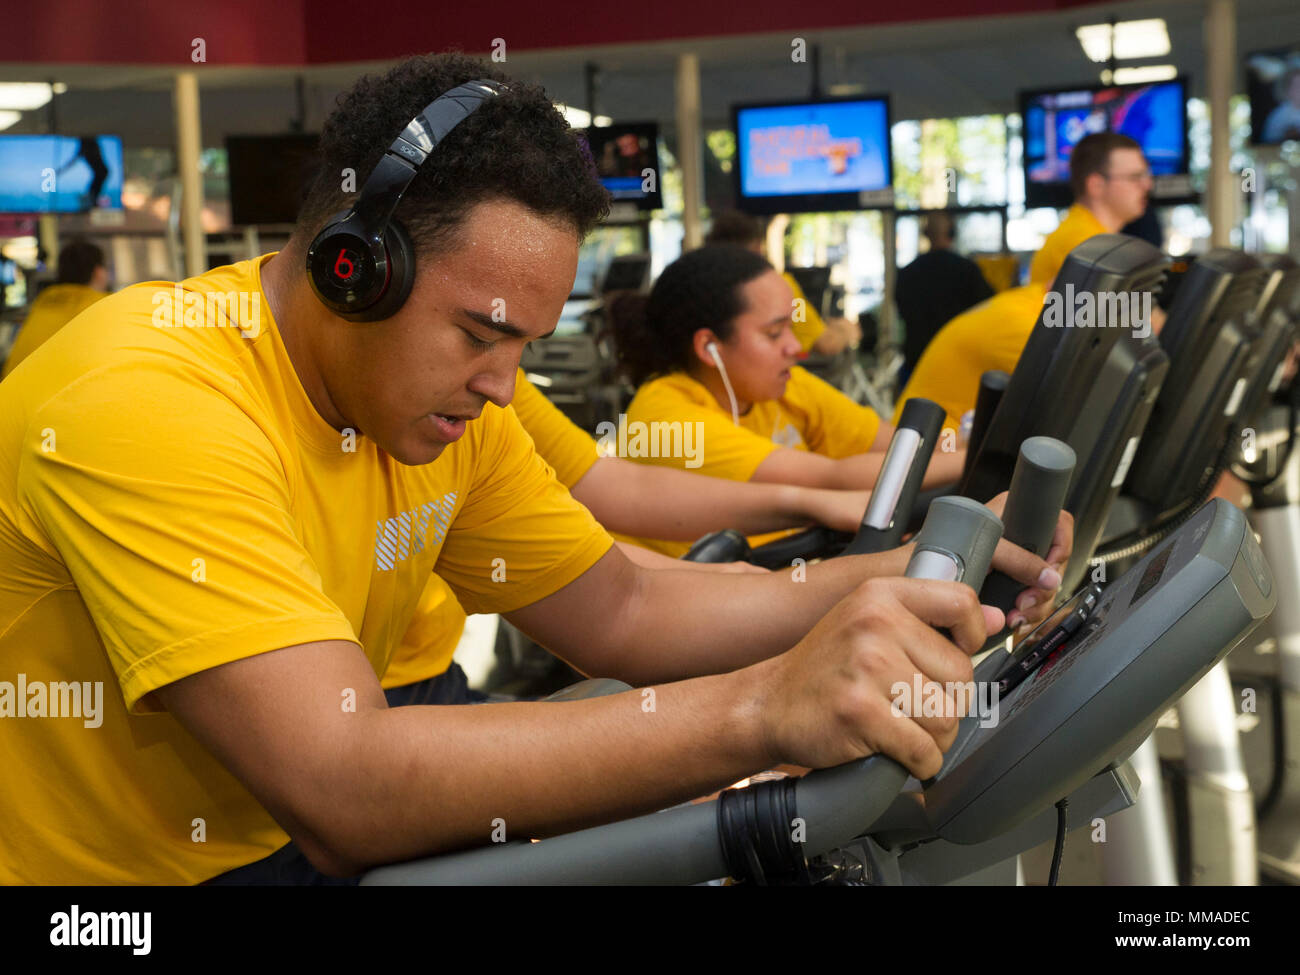 170922-N-KC543-063  NORFOLK (Sept. 22, 2017) Information Systems Technician 3rd Class Shandon Williams uses a stationary bike during a physical fitness test for the Nimitz-Class aircraft carrier USS George Washington (CVN 73). George Washington is undergoing a refueling and complex overhaul (RCOH) at Newport News Shipyard. RCOH is a four-year project performed only once during a carrier’s 50-year service life that includes refueling of the ship’s two nuclear reactors, as well as significant repair, upgrades and modernizations. (U.S. Navy photo by Mass Communication Specialist 2nd Class Alora R Stock Photo